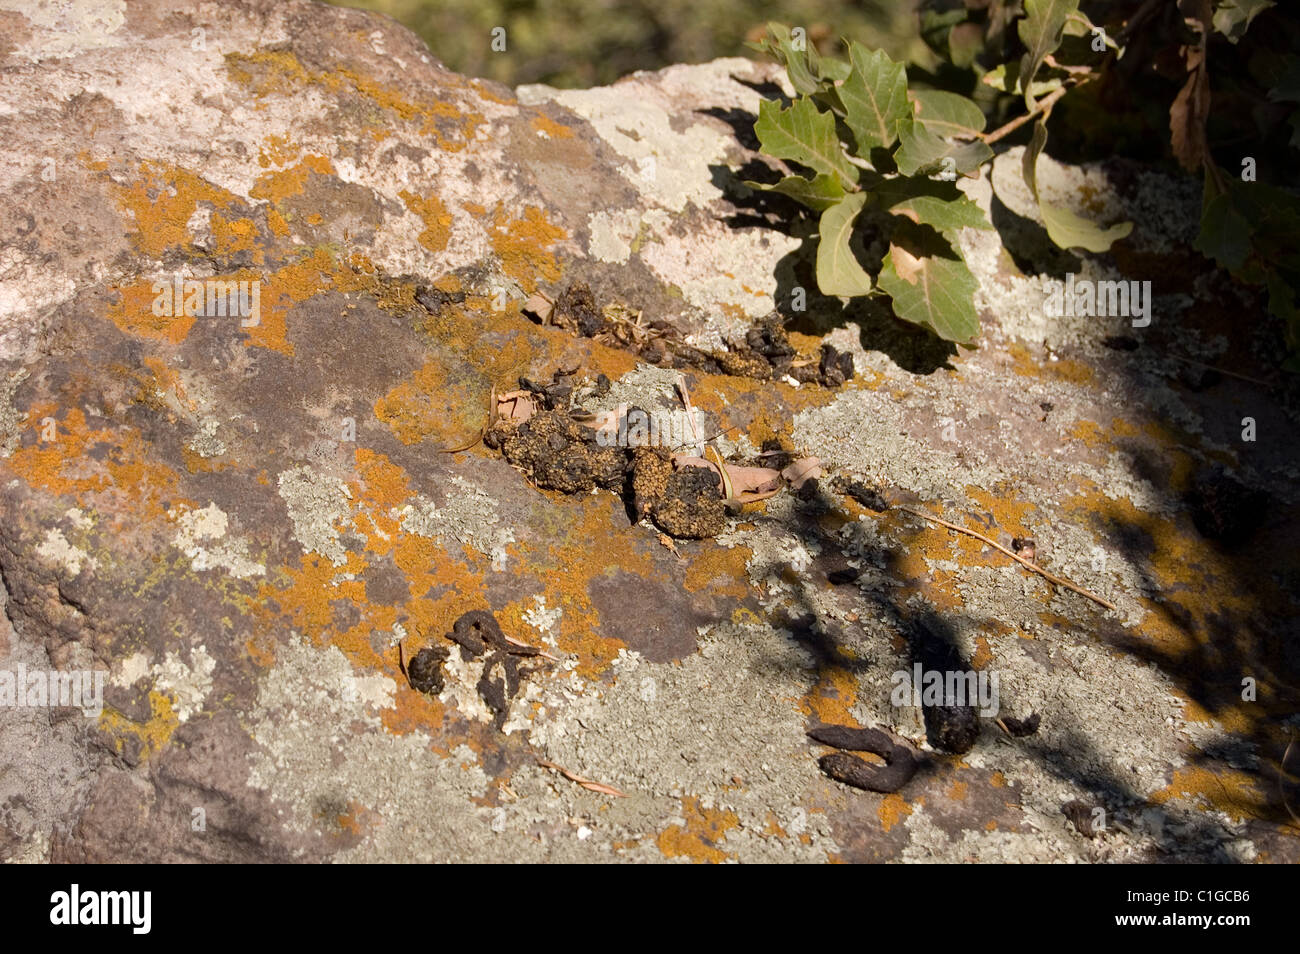 Tlacuache (a Mexican marsupial) excrement filled with cactus seeds over a rock with lichen in Mexico Stock Photo